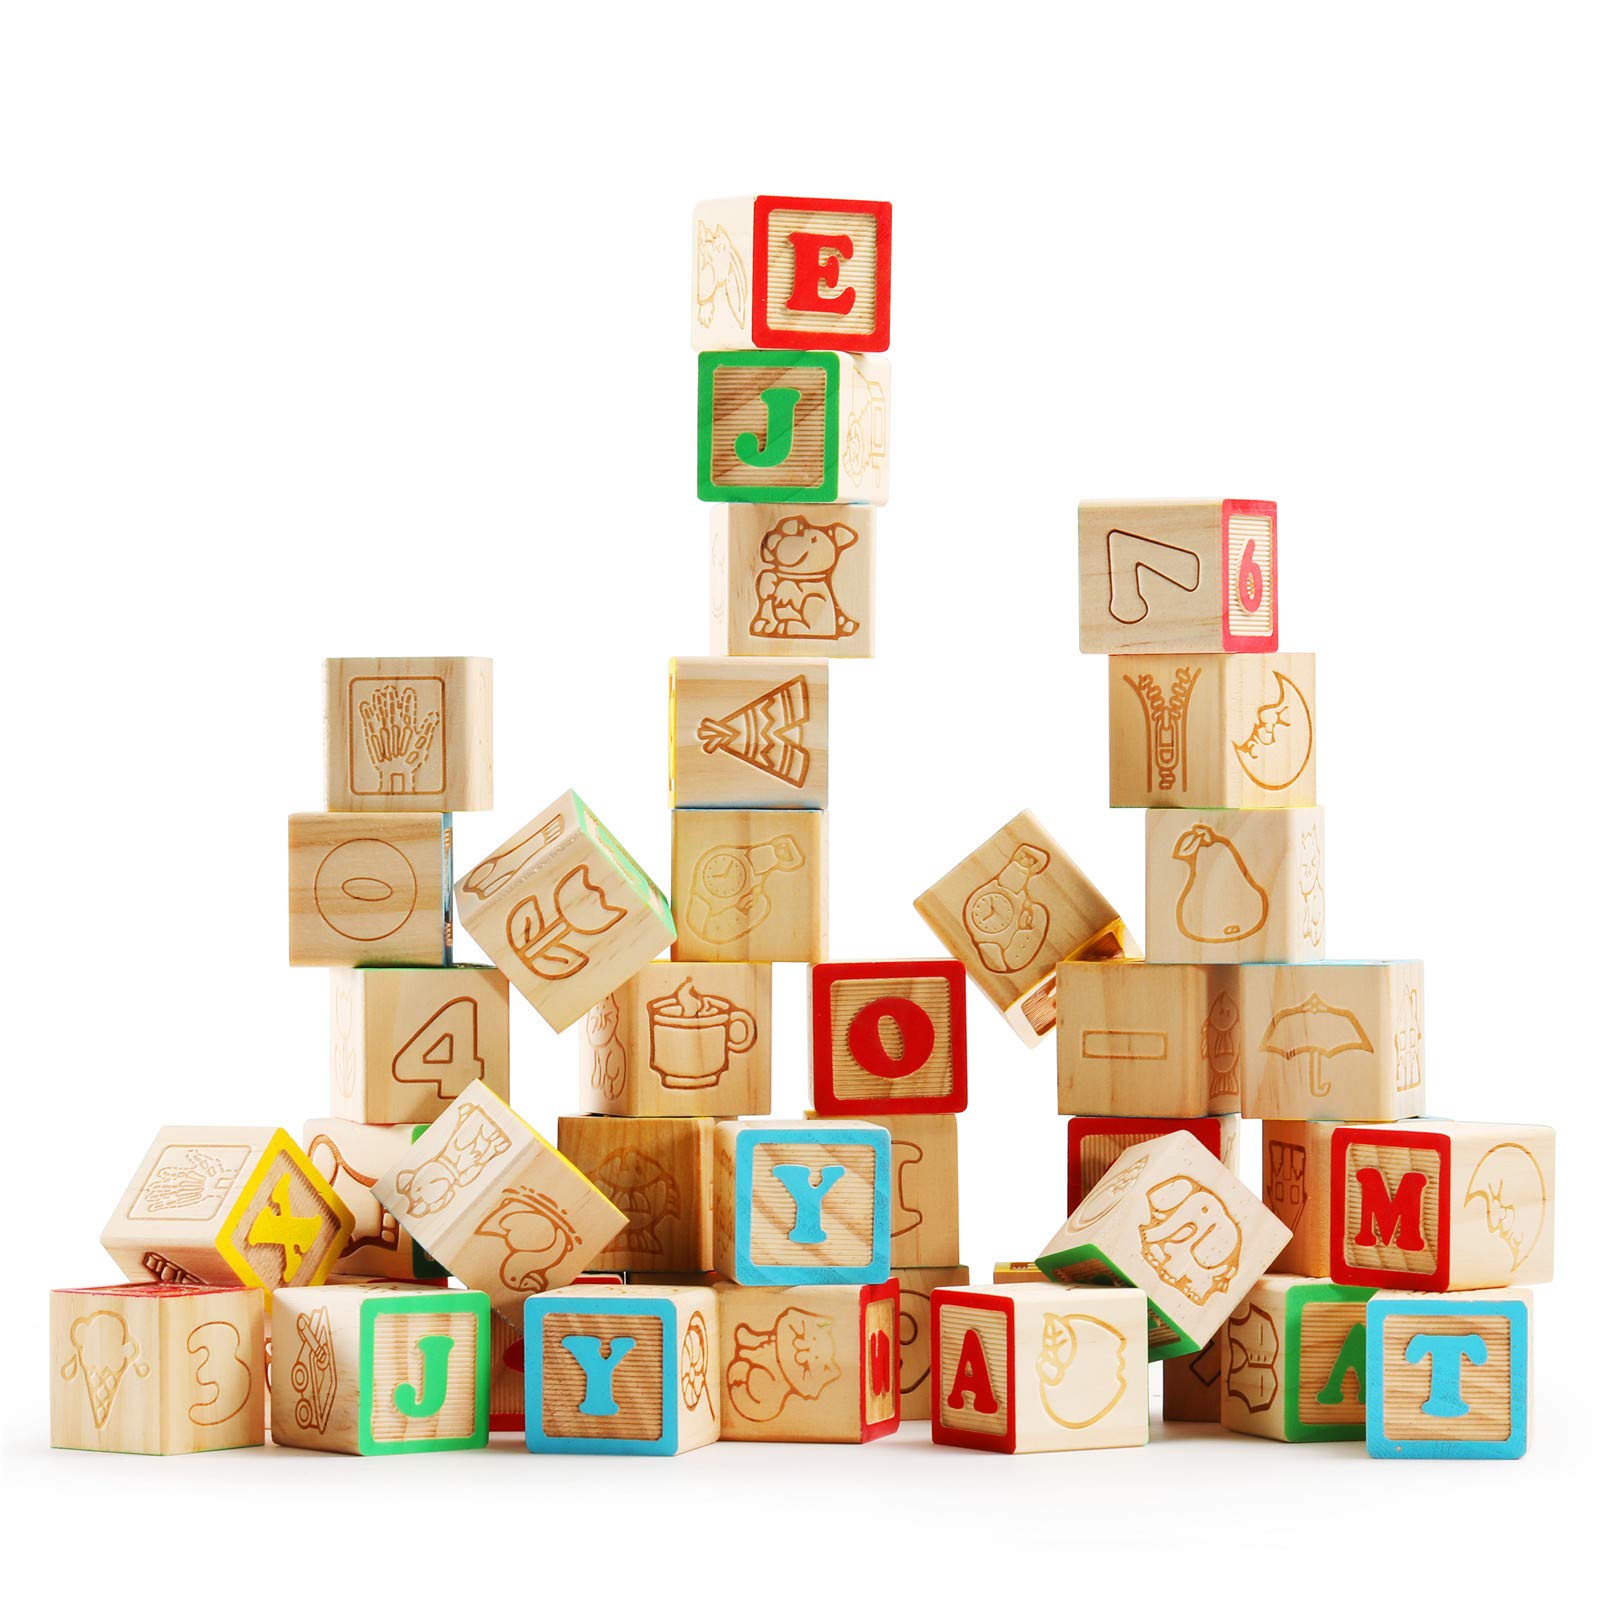 SainSmart Jr. Wooden ABC Alphabet Blocks Set, 40PCS Classic Wood Toy for Stacking Building Educational Learning, with Mesh Bag for Preschool Letters Number Counting for Ages 3 4 5 6 Toddlers,1.2